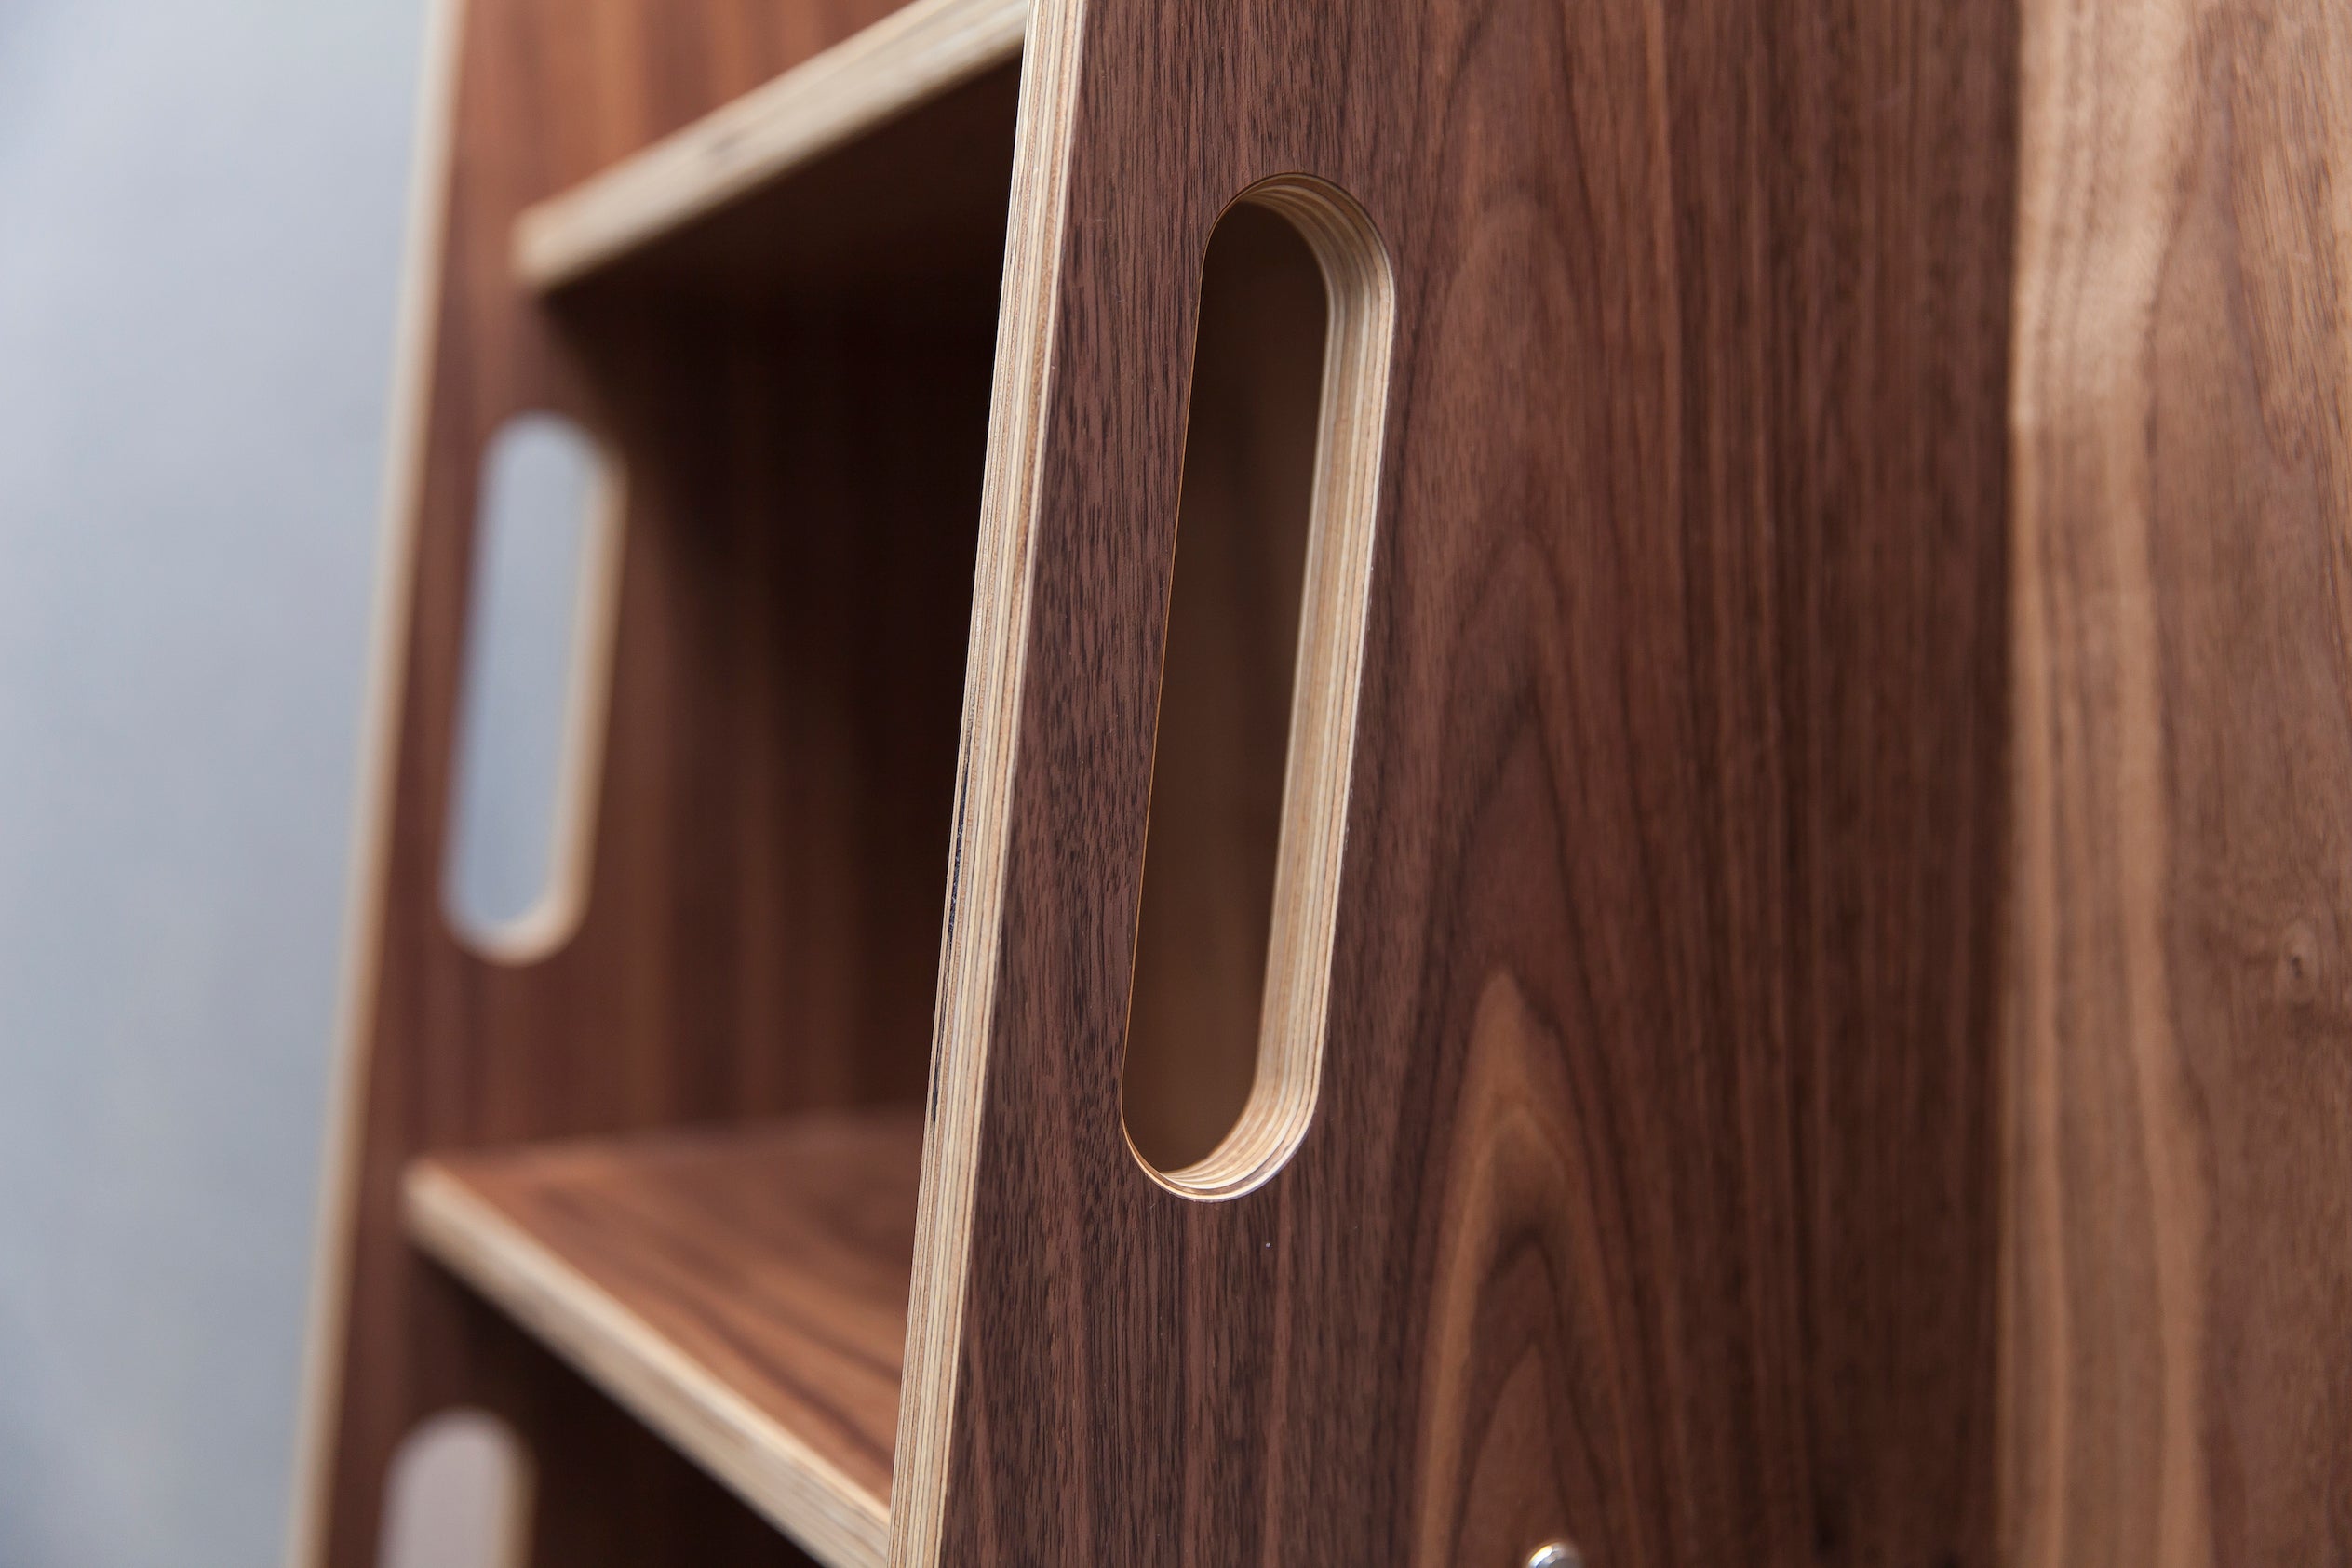 Close-up view of a dark wooden bookshelf with oval cutouts as handles, highlighting the design.